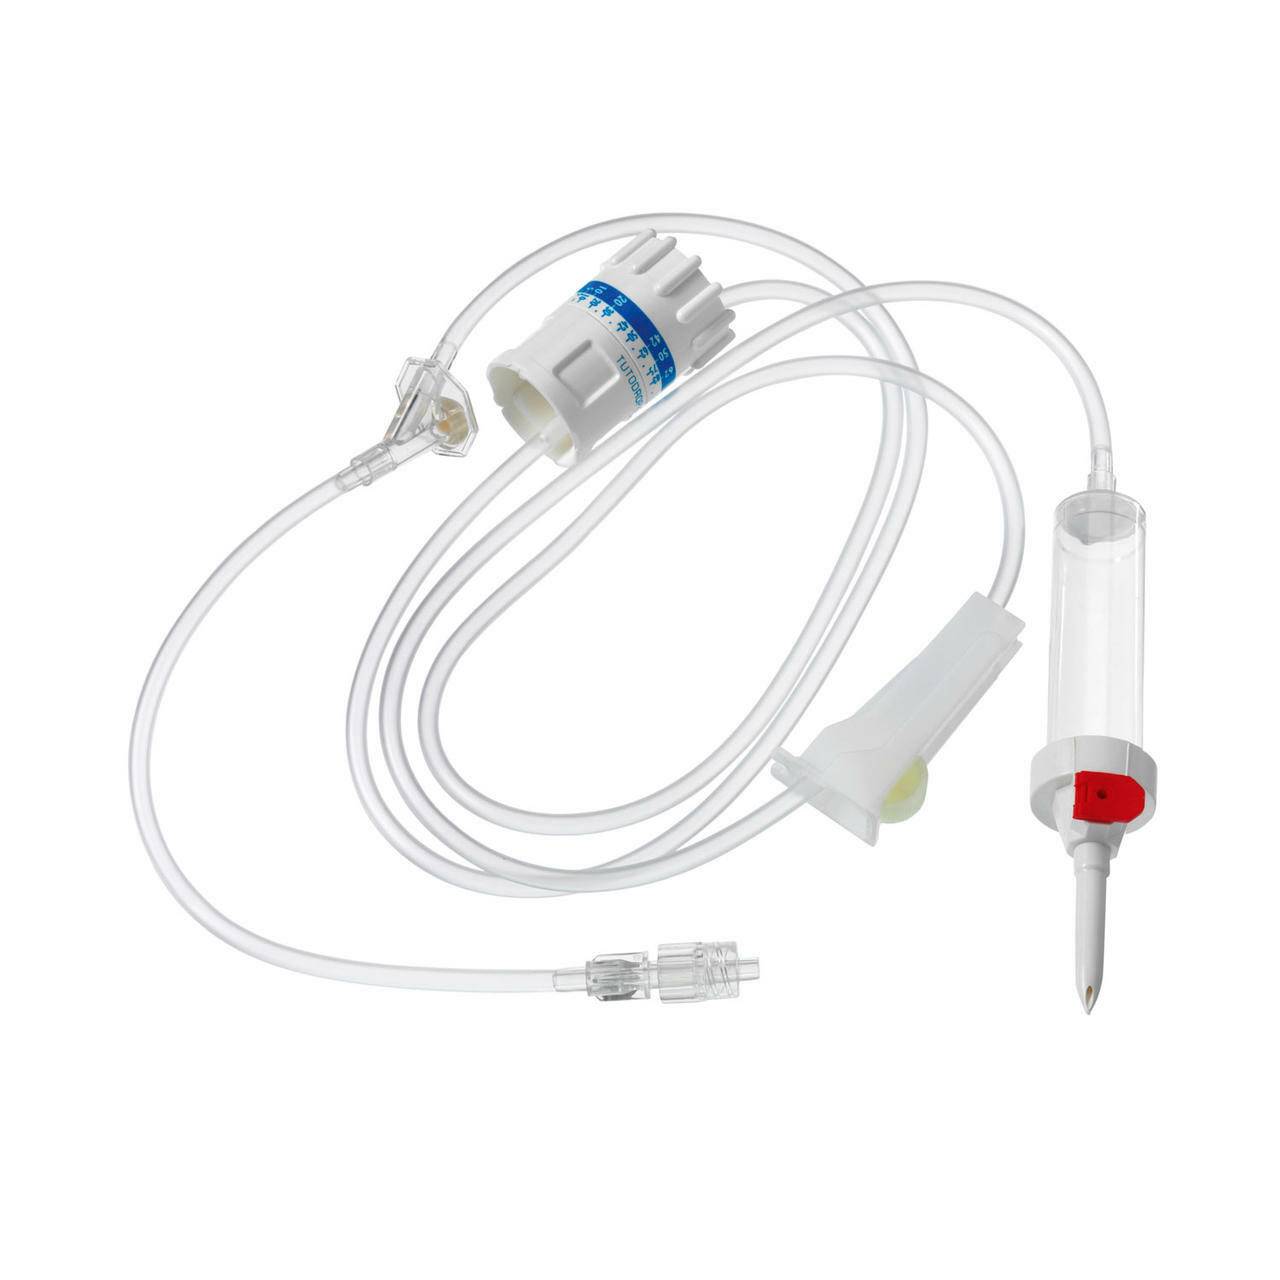 BD Alaris Gravity Infusion Set with Precision Flow Controller Rotating/DoubleScale